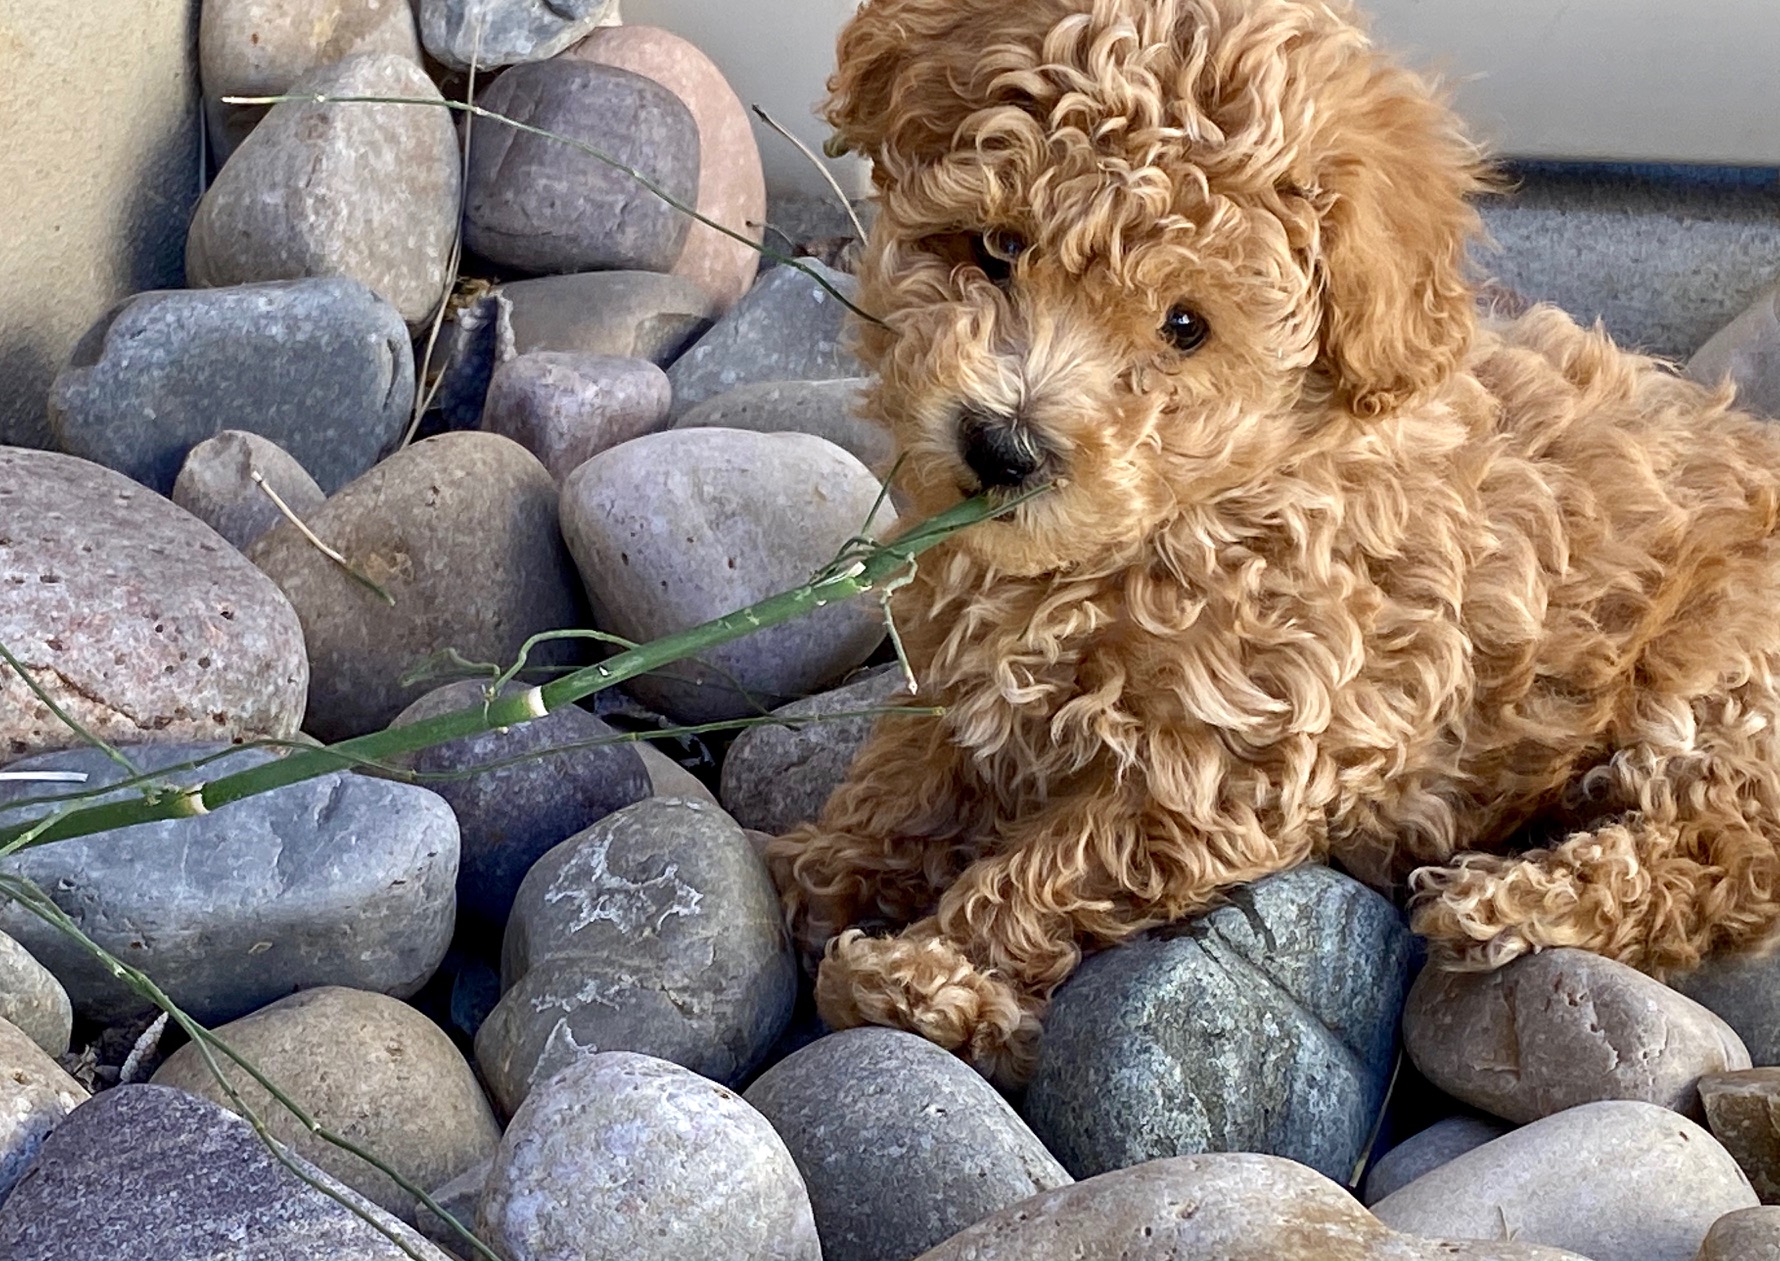 A small brown dog calmly perched on a cluster of rocks.